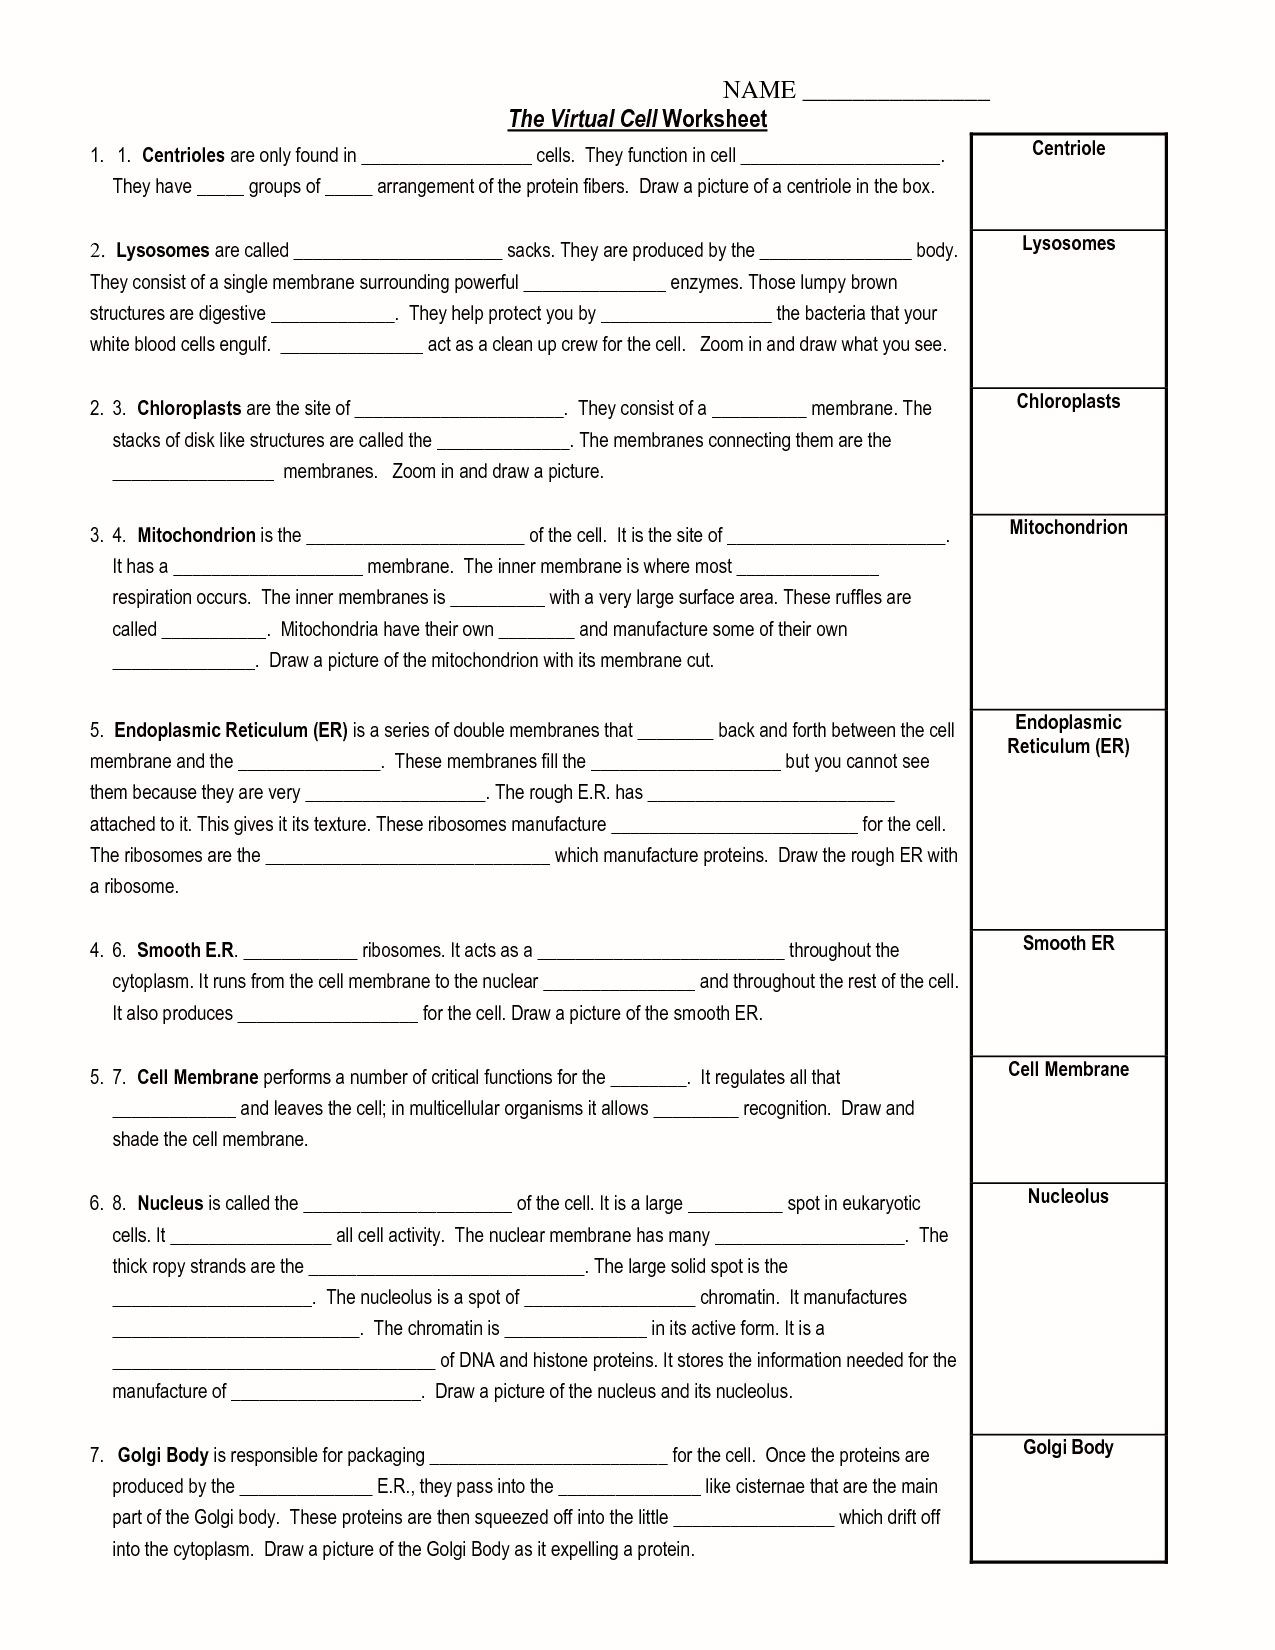 Cells and their organelles Worksheet Cell organelles and their Functions Worksheet Answers